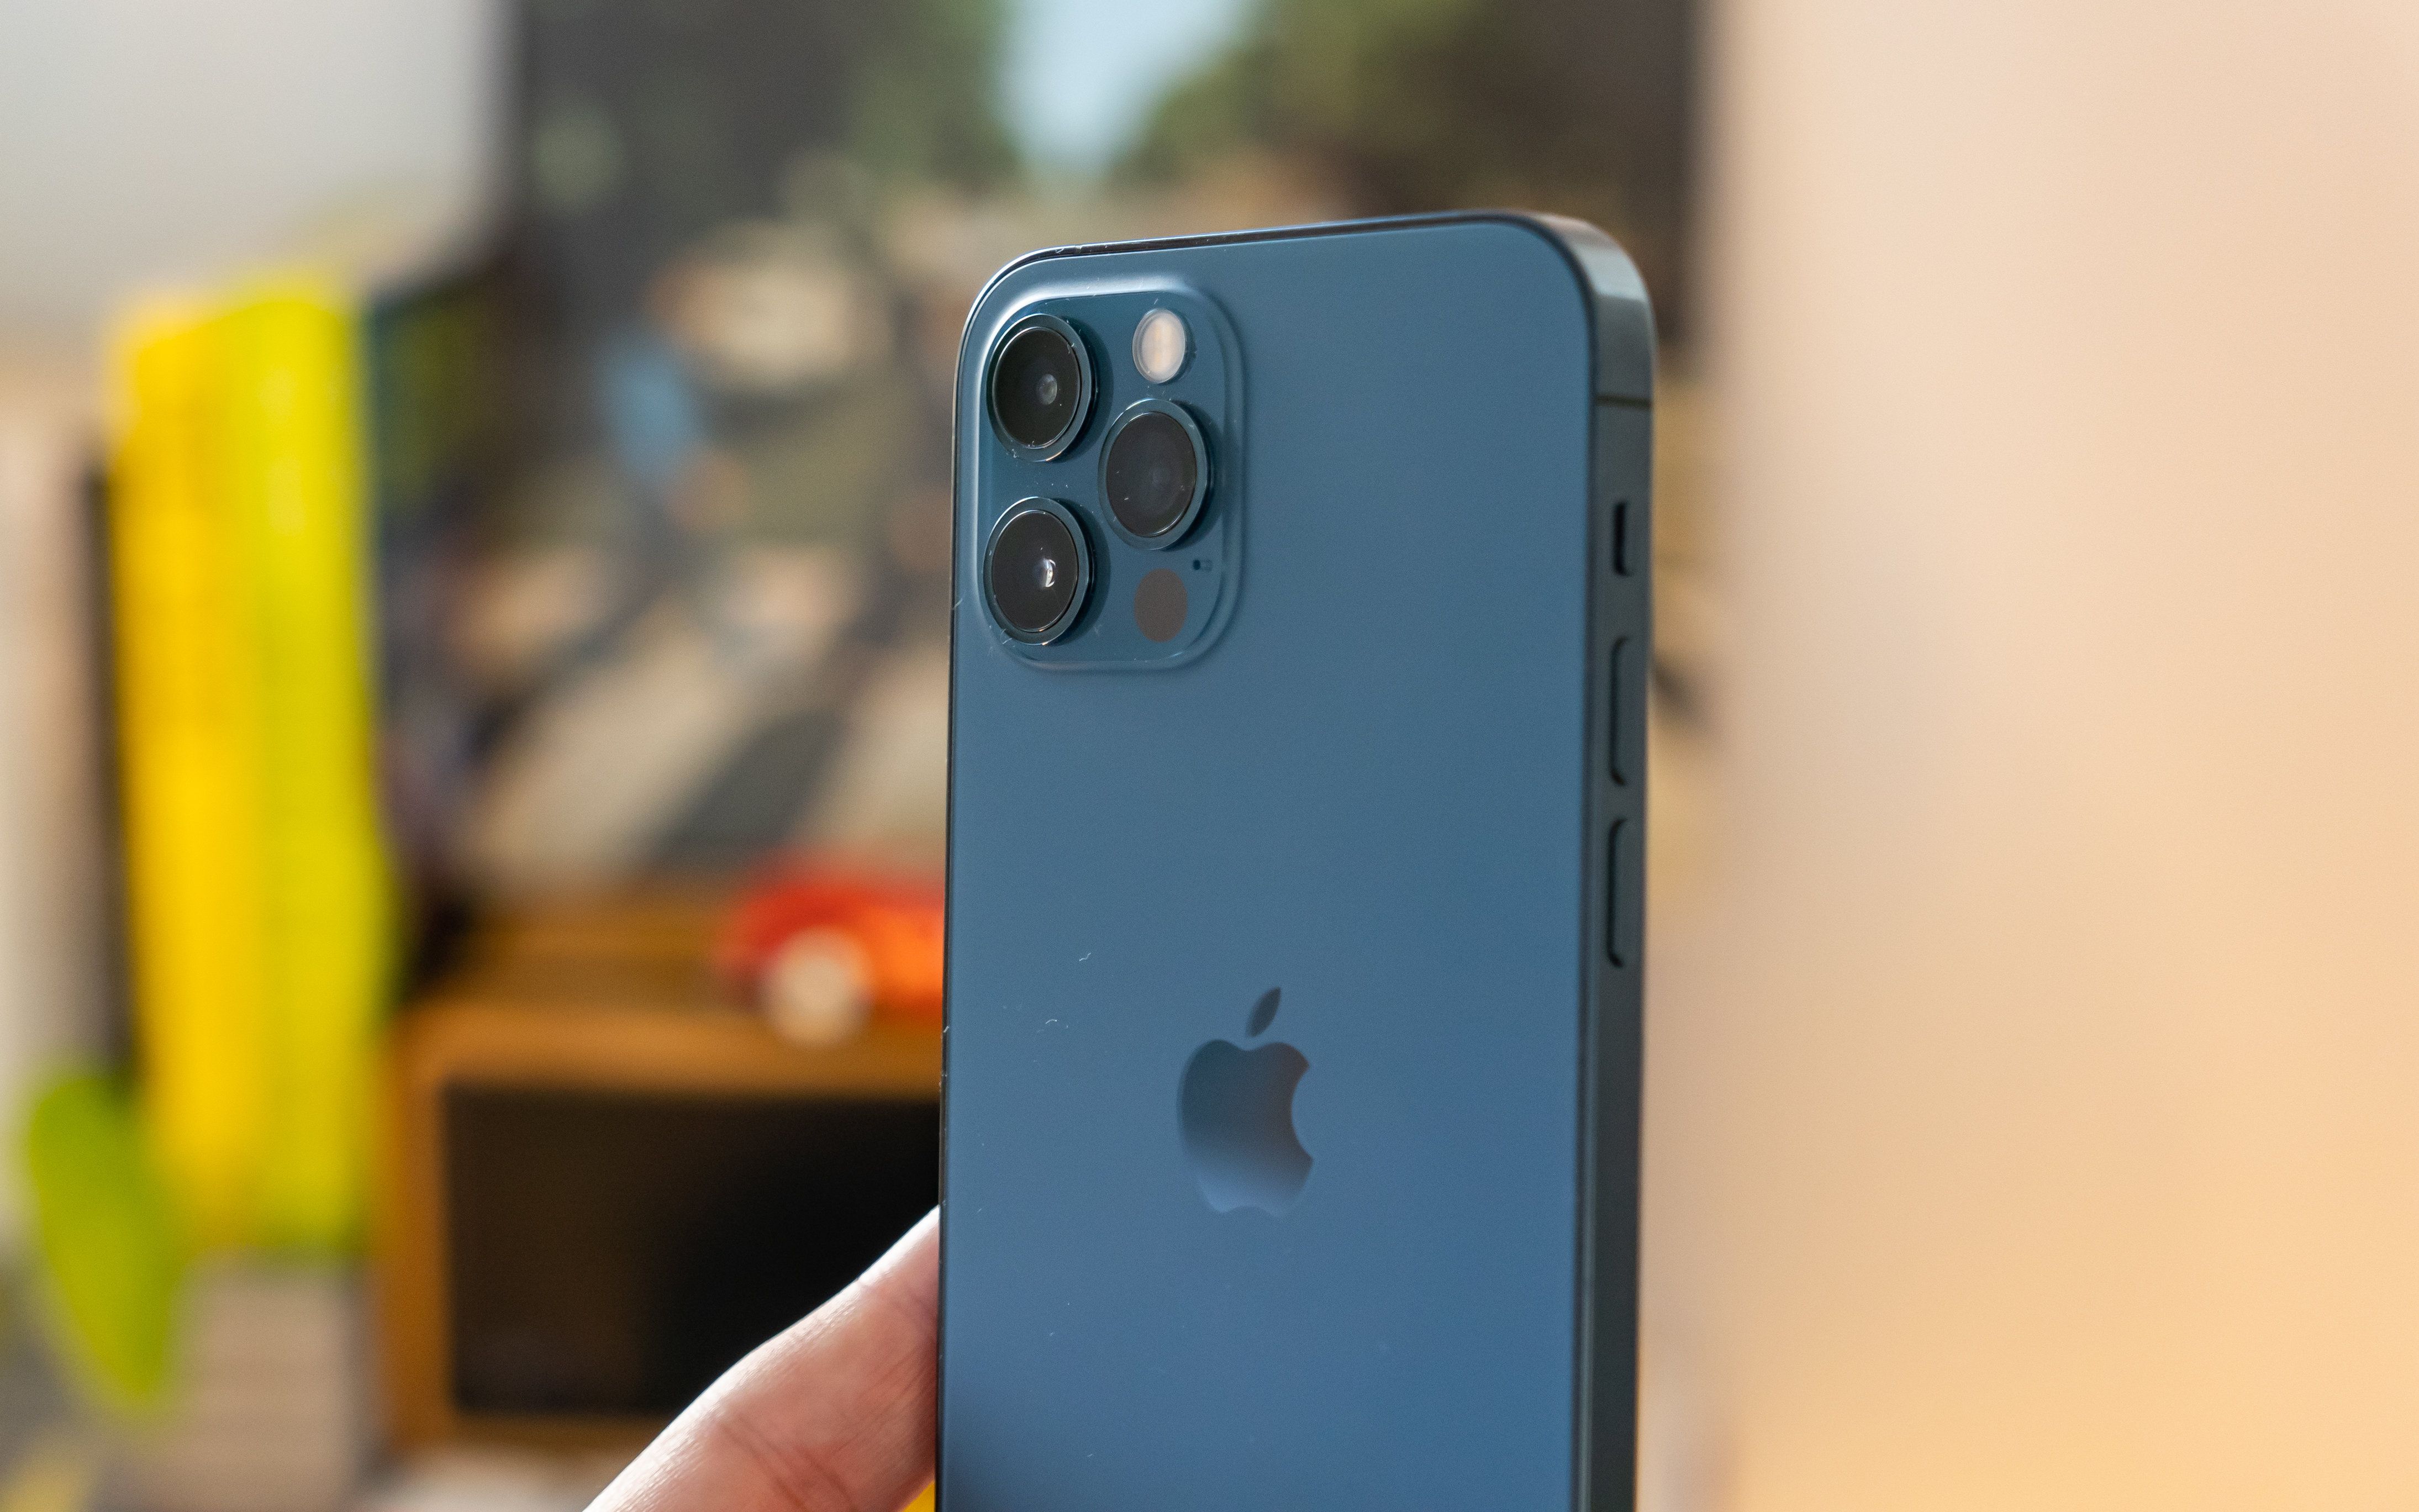 Three-lens rear camera system of the iPhone 12 Pro